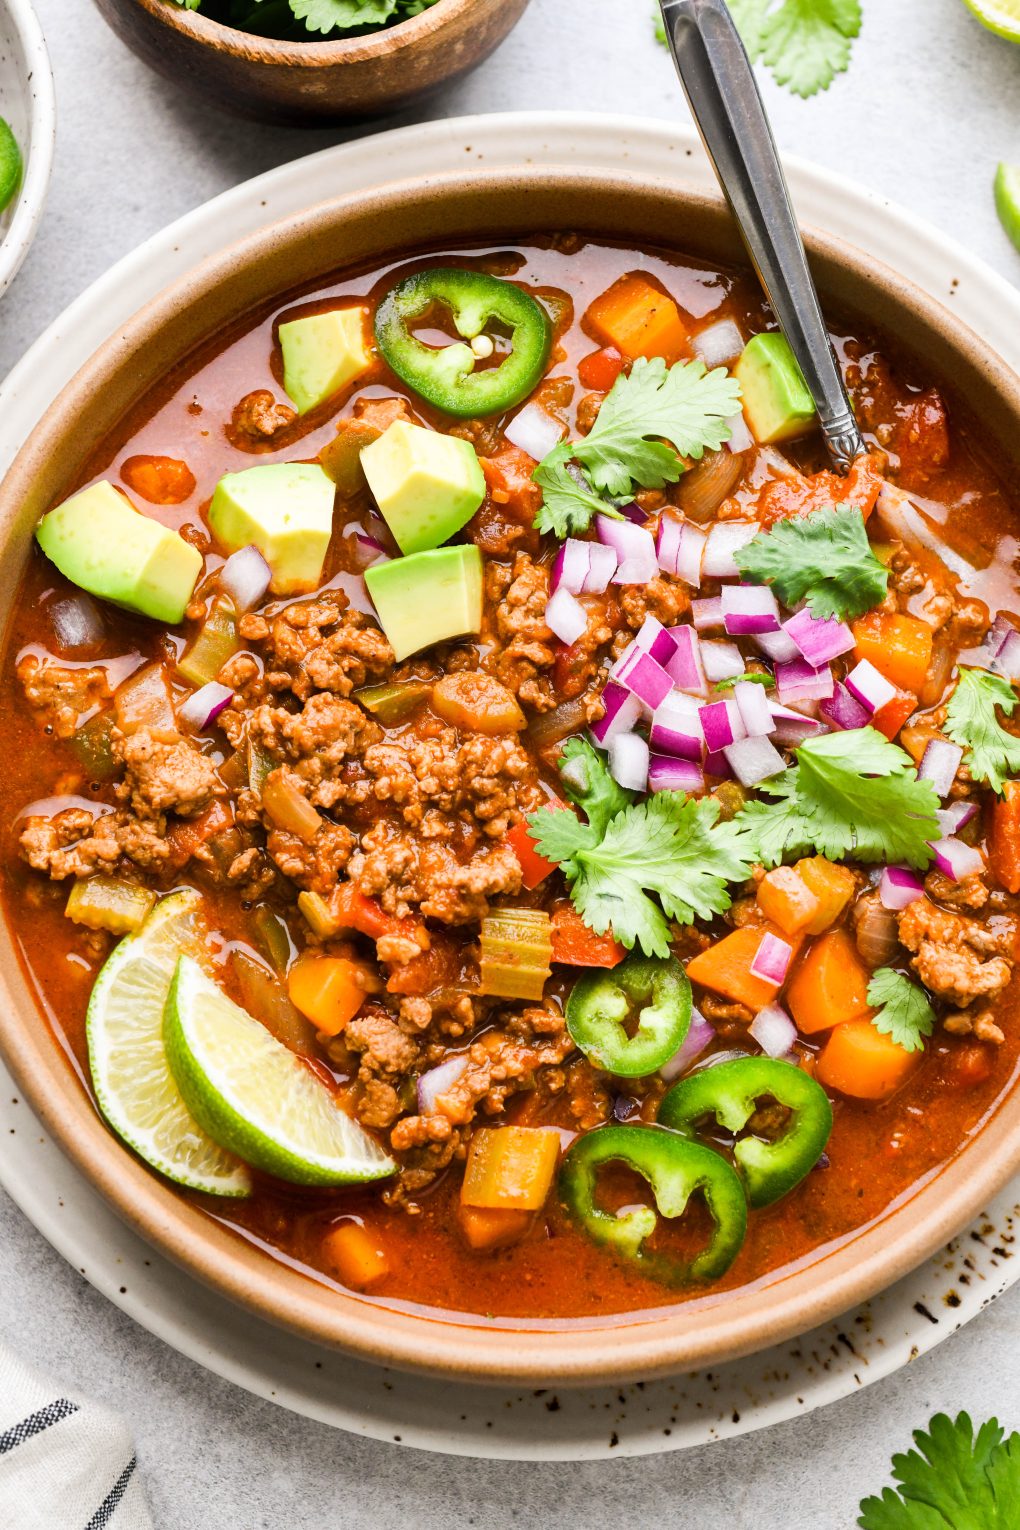 Colorful bowl of beanless Whole30 chili topped with avocado, red onion, cilantro, sliced jalapeno, and lime wedges.